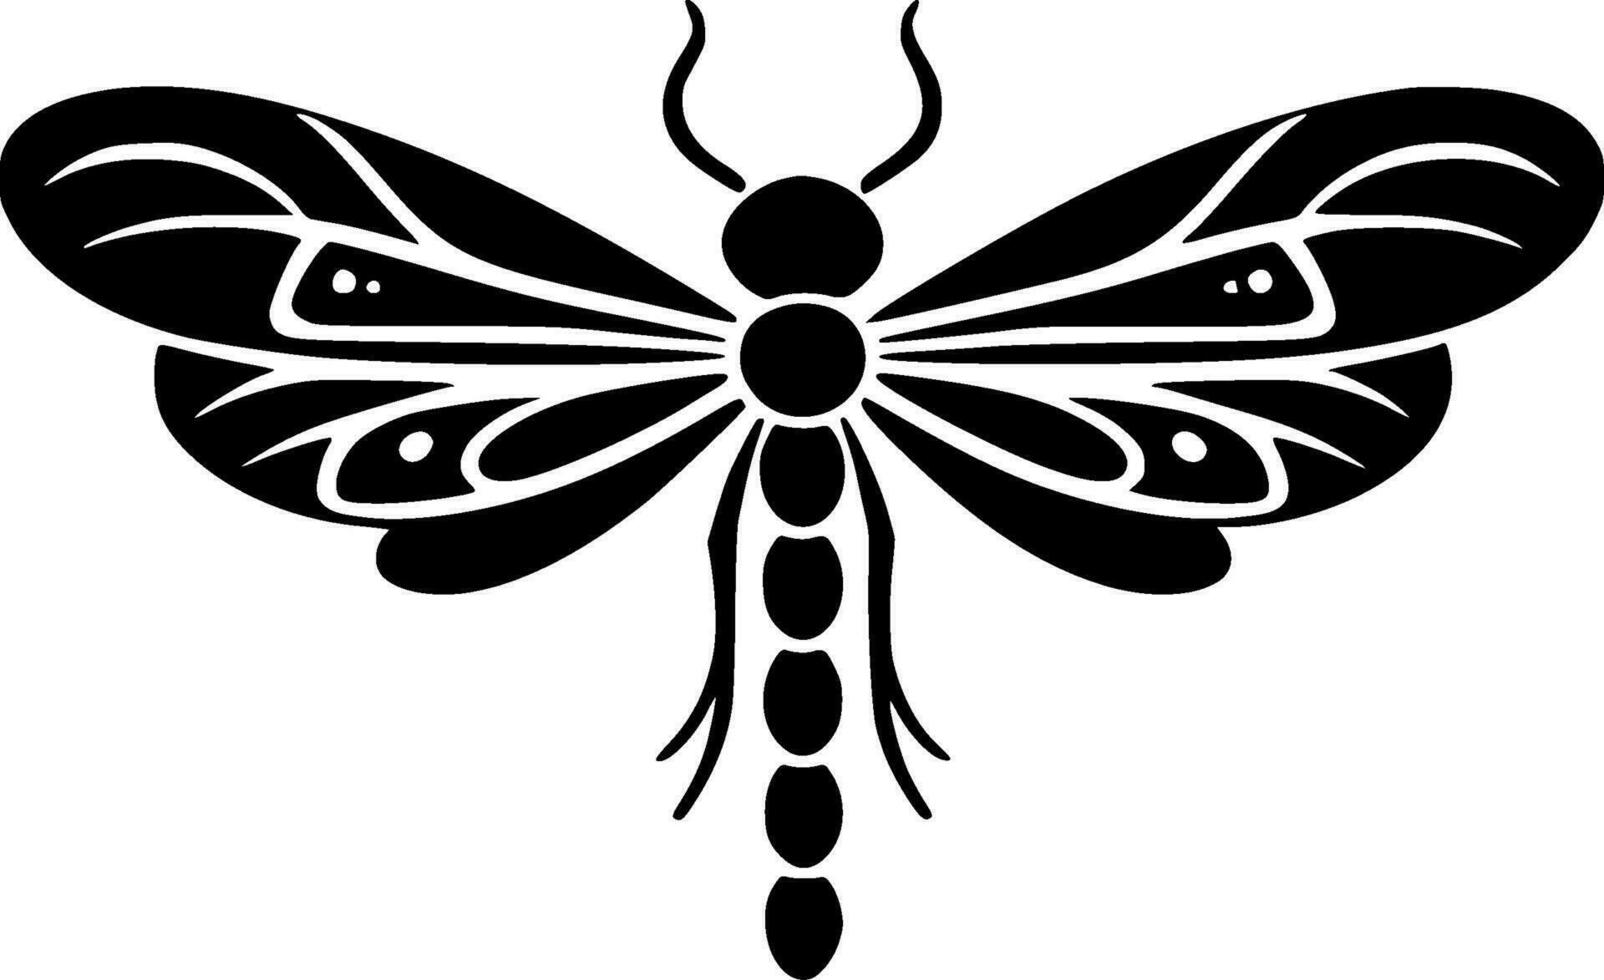 Dragonfly, Minimalist and Simple Silhouette - Vector illustration